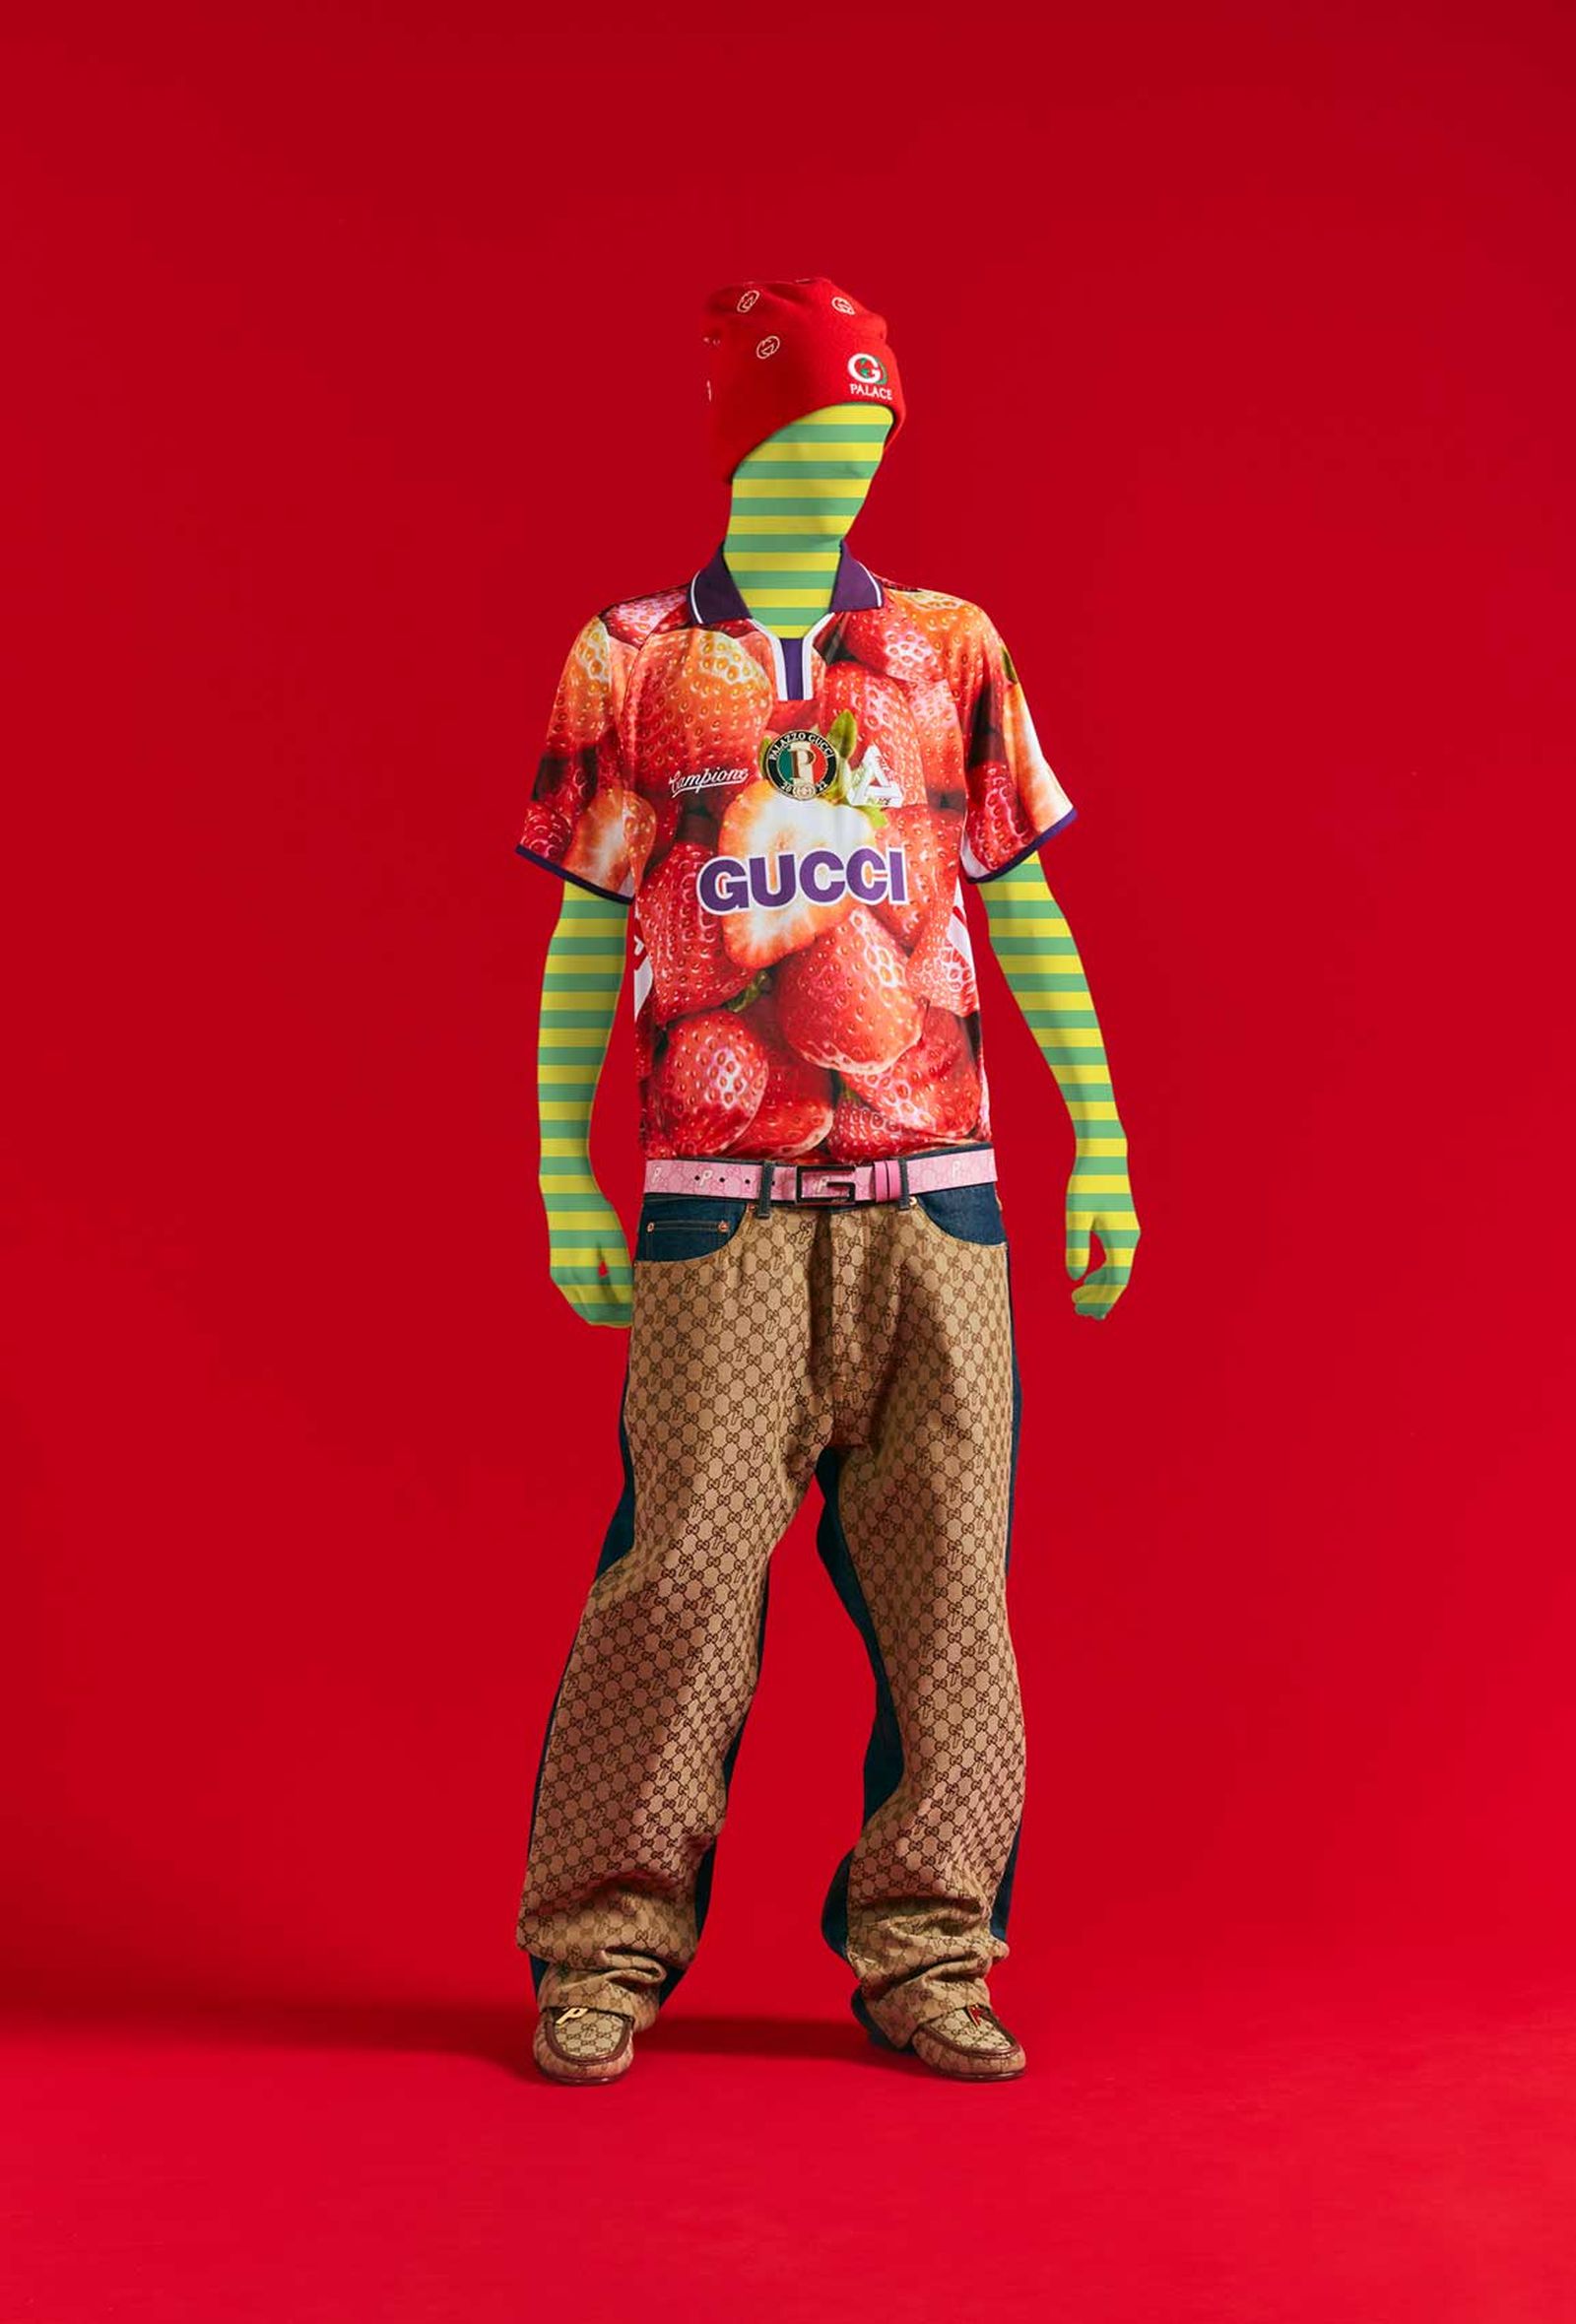 palace-skateboards-gucci-collab-release-date- (2)